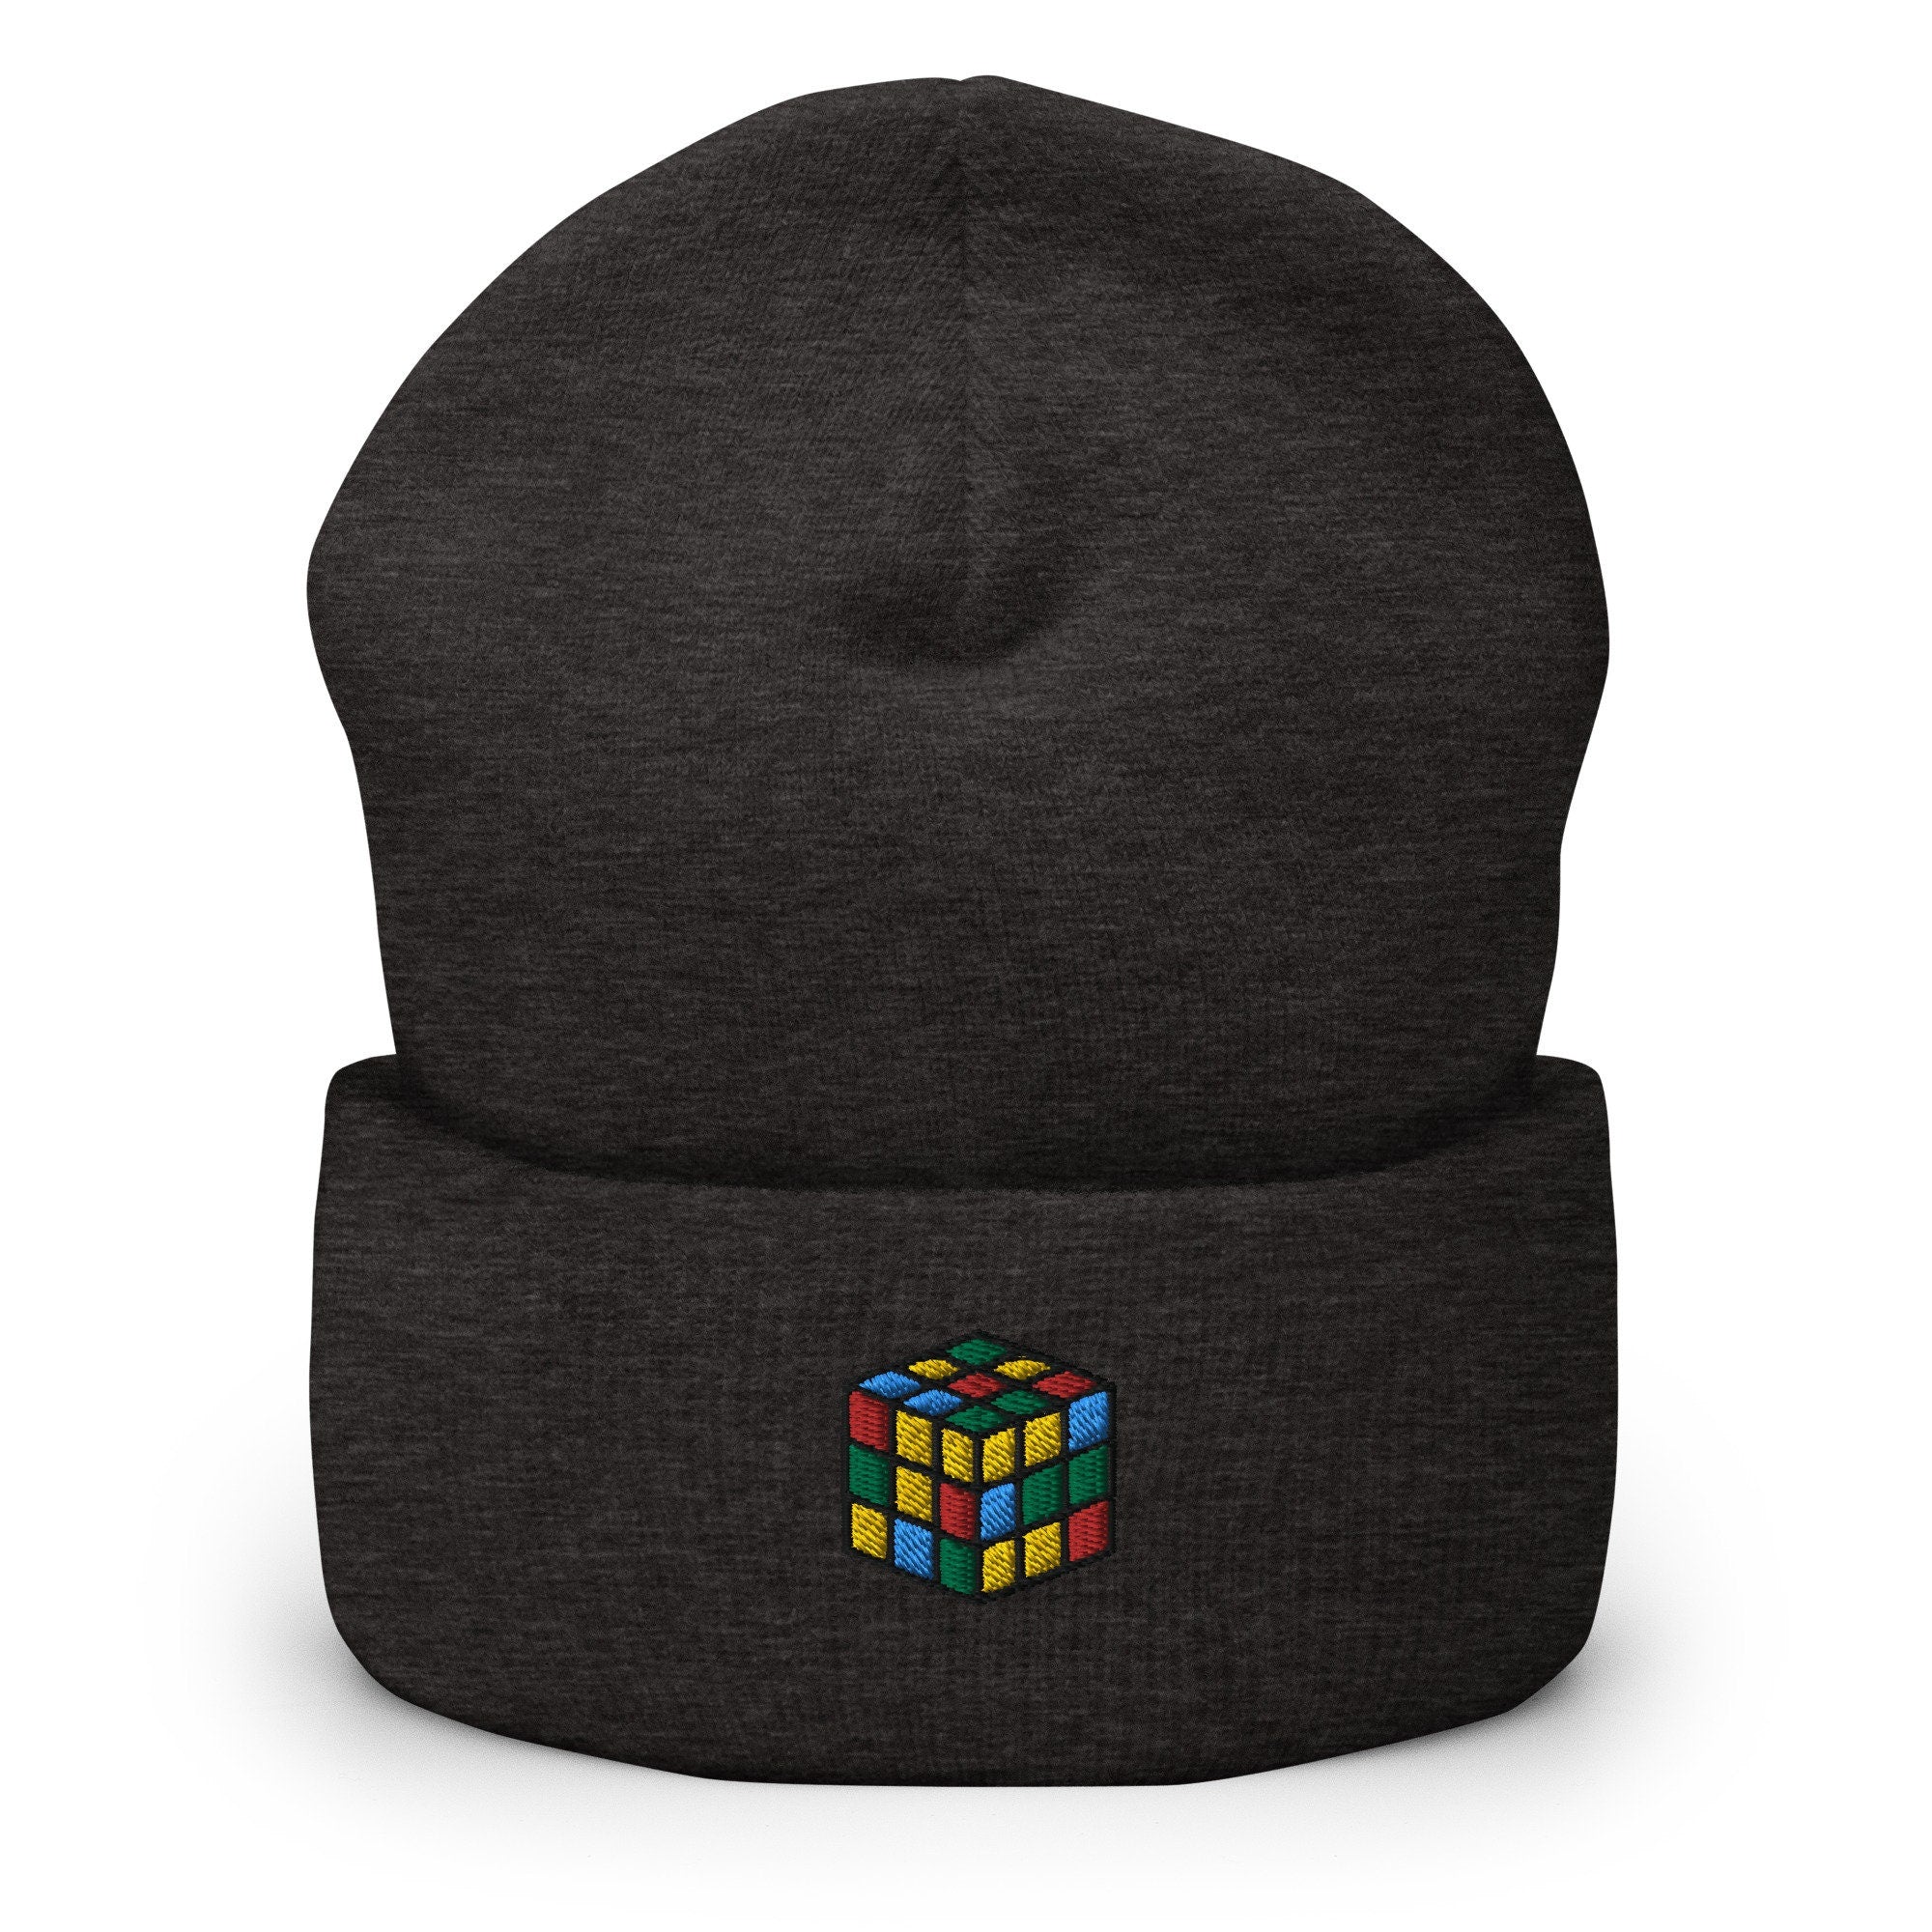 Rubik's Cube Puzzle Embroidered Beanie, Handmade Cuffed Knit Unisex Slouchy Adult Winter Hat Cap Gift